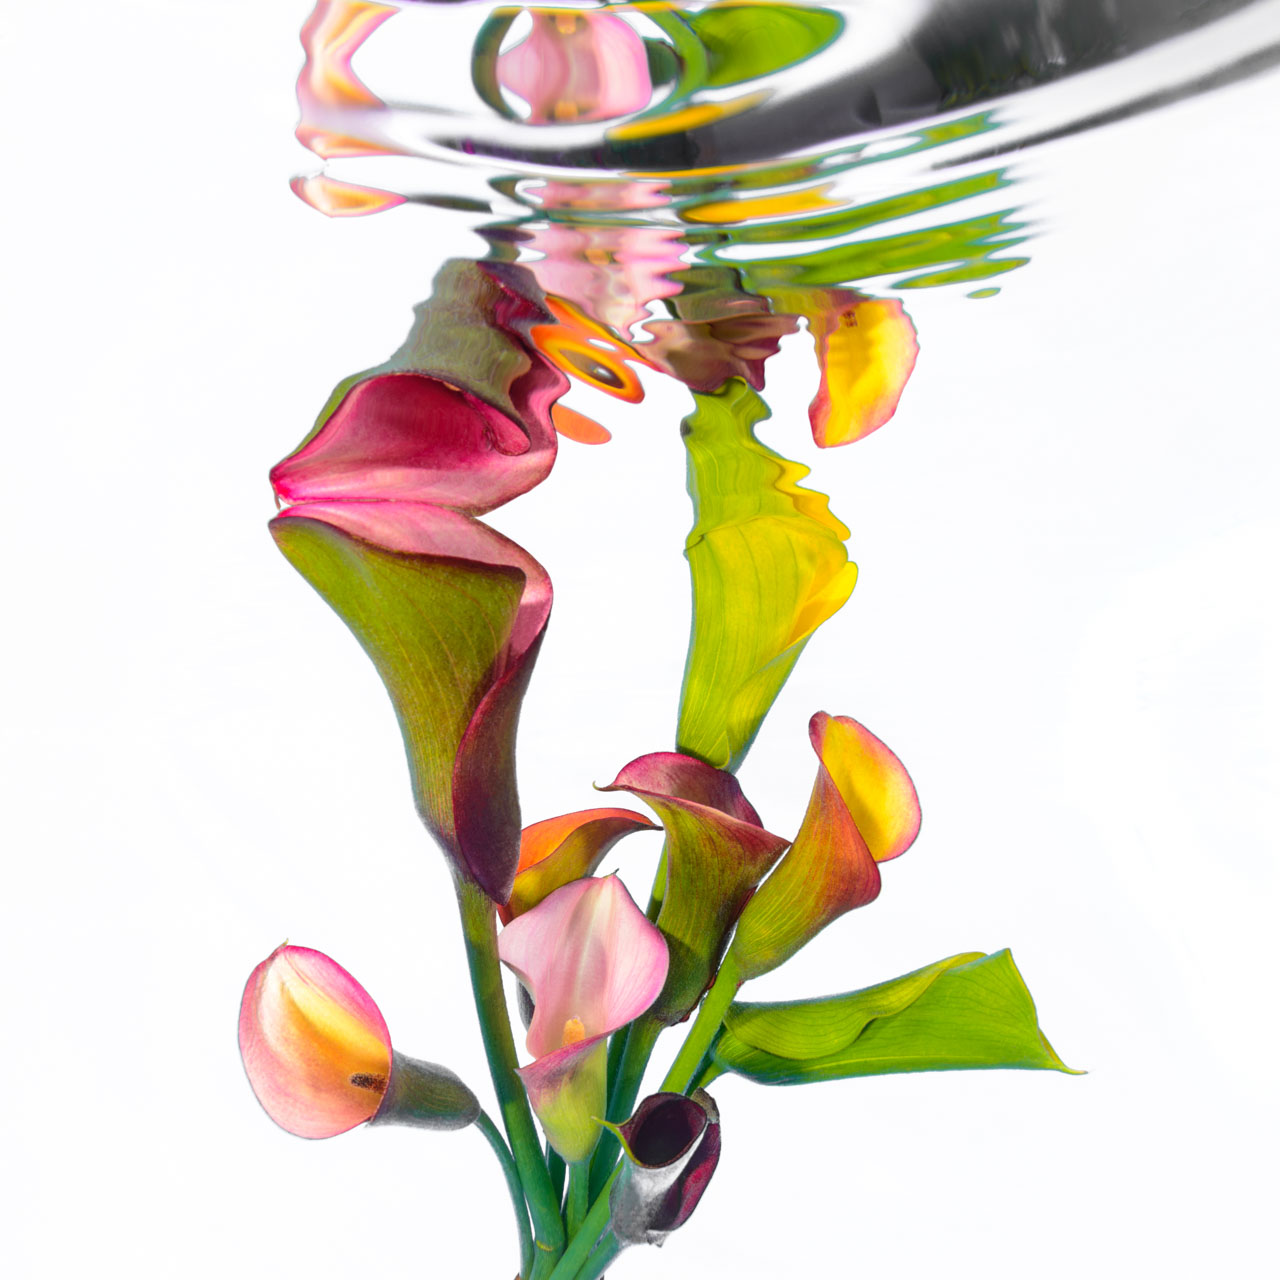 PIcasso like image of colourful Cala Lilies taken underwater